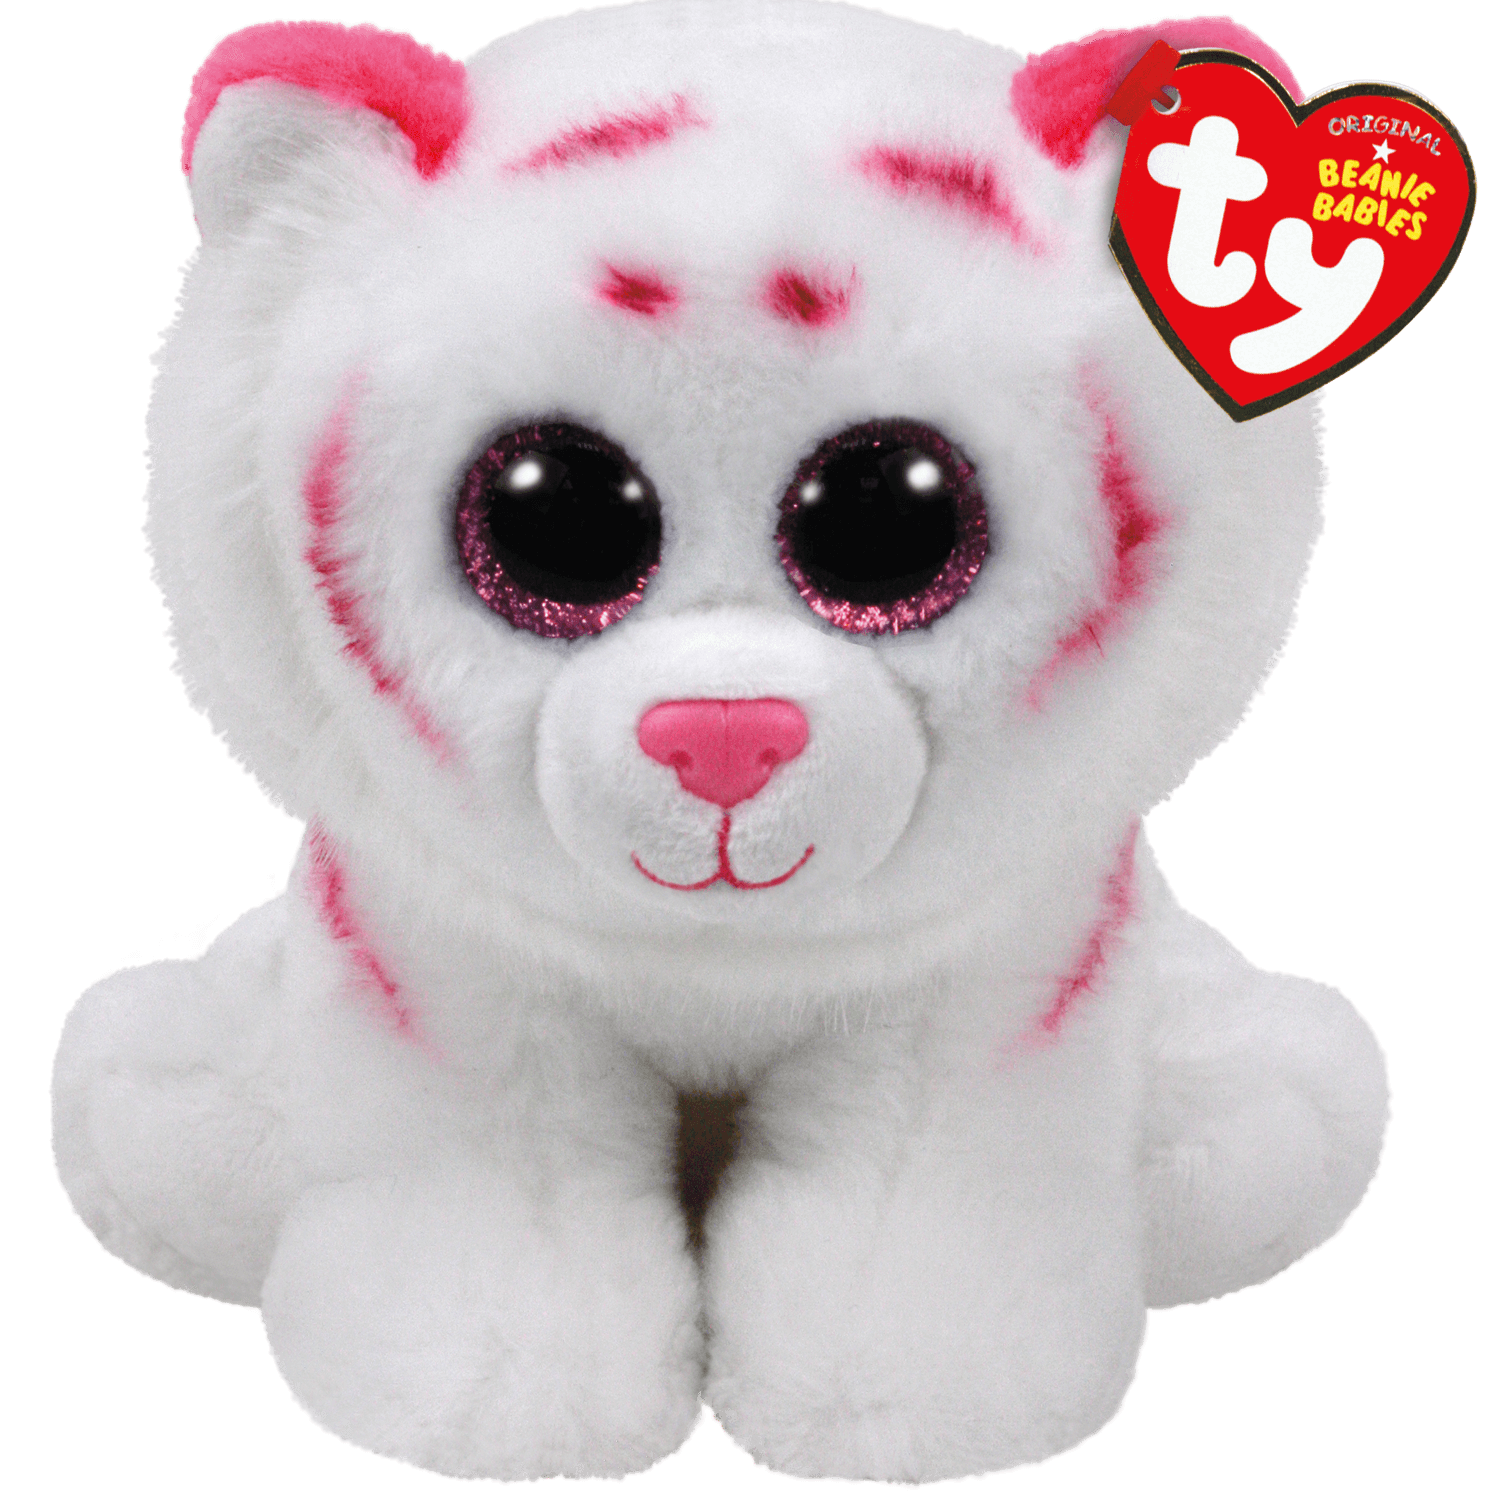 TY Beanie Boos - SAPPHIRE the Pink & White Zebra (Regular Size - 6.5 inch)  (Mint): : Sell TY Beanie Babies, Action Figures,  Barbies, Cards & Toys selling online